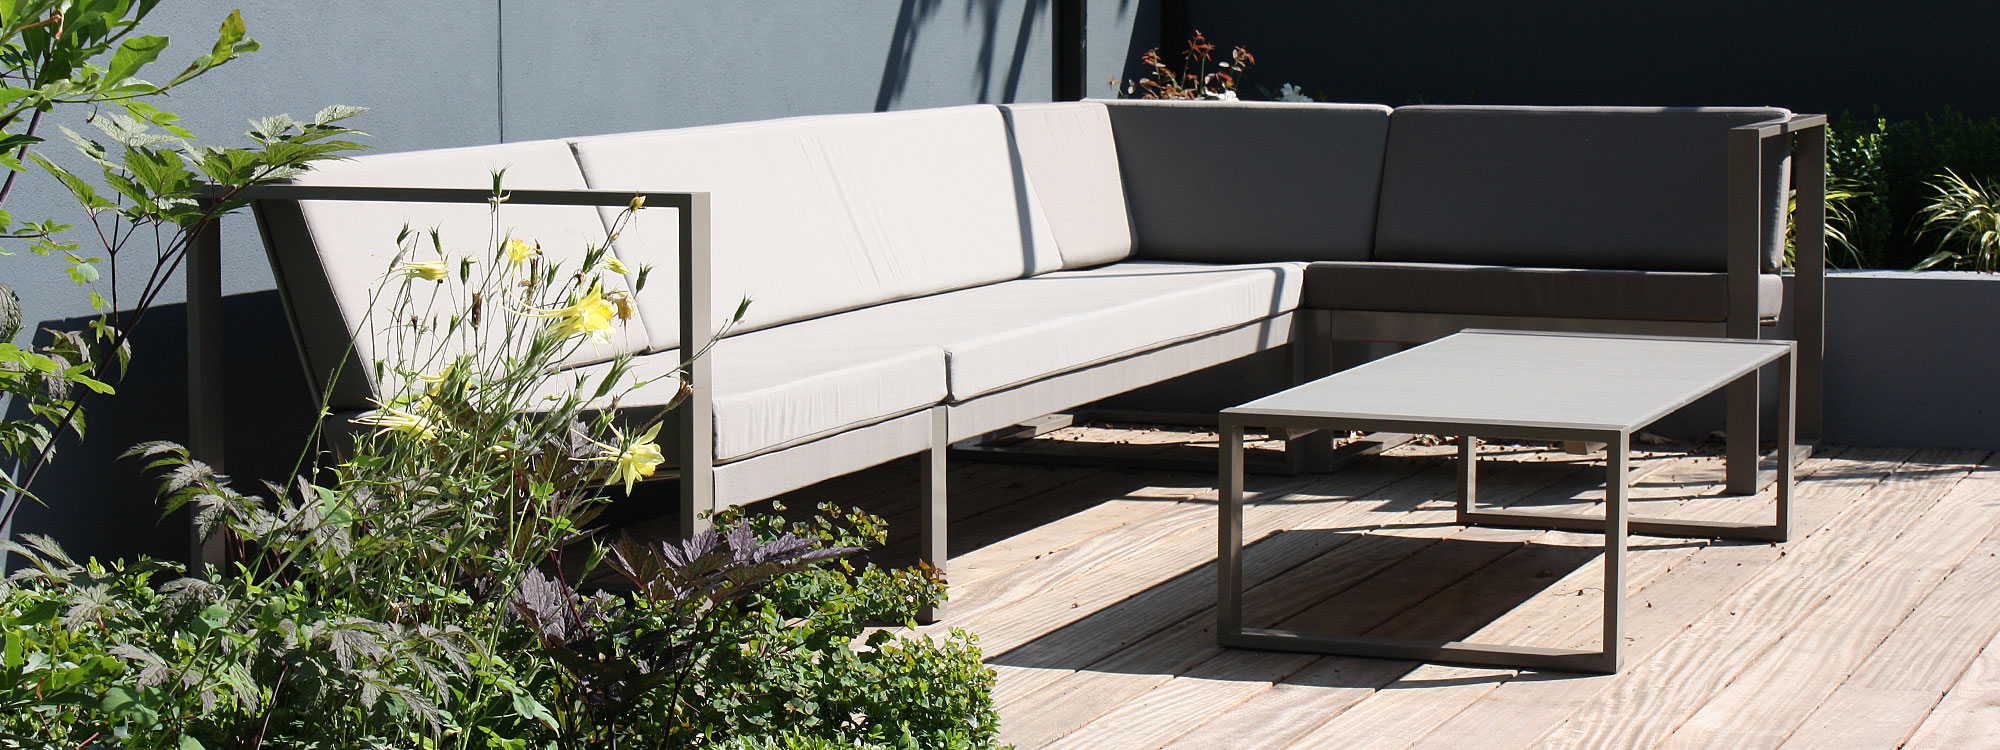 Image of FueraDentro Cima Lounge modern garden corner sofa with taupe frame and taupe cushions, shown on sunny decking in London